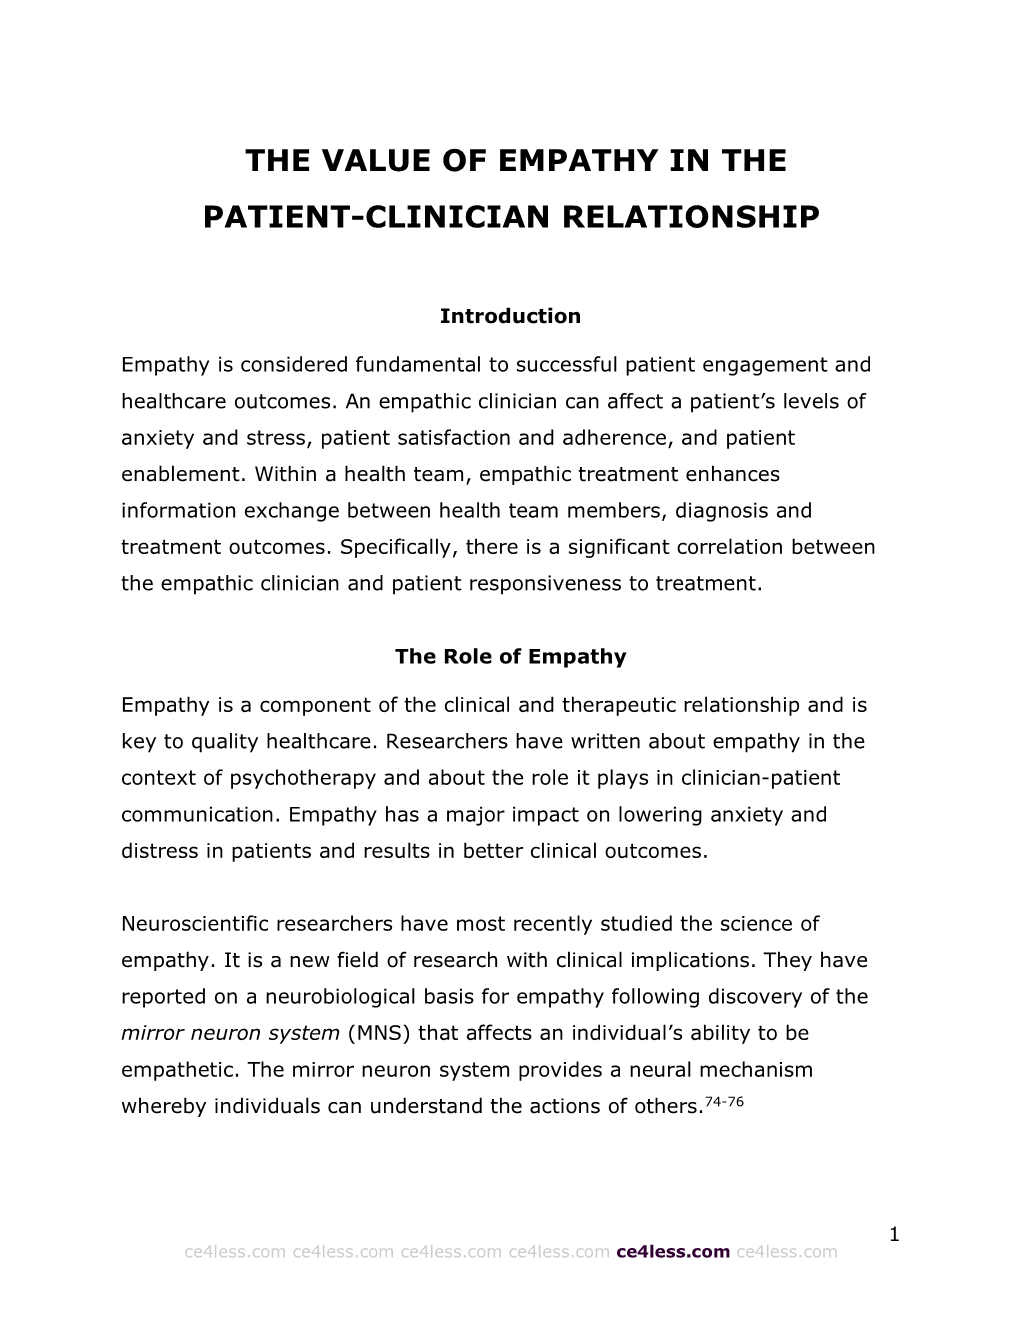 The Value of Empathy in the Patient-Clinician Relationship